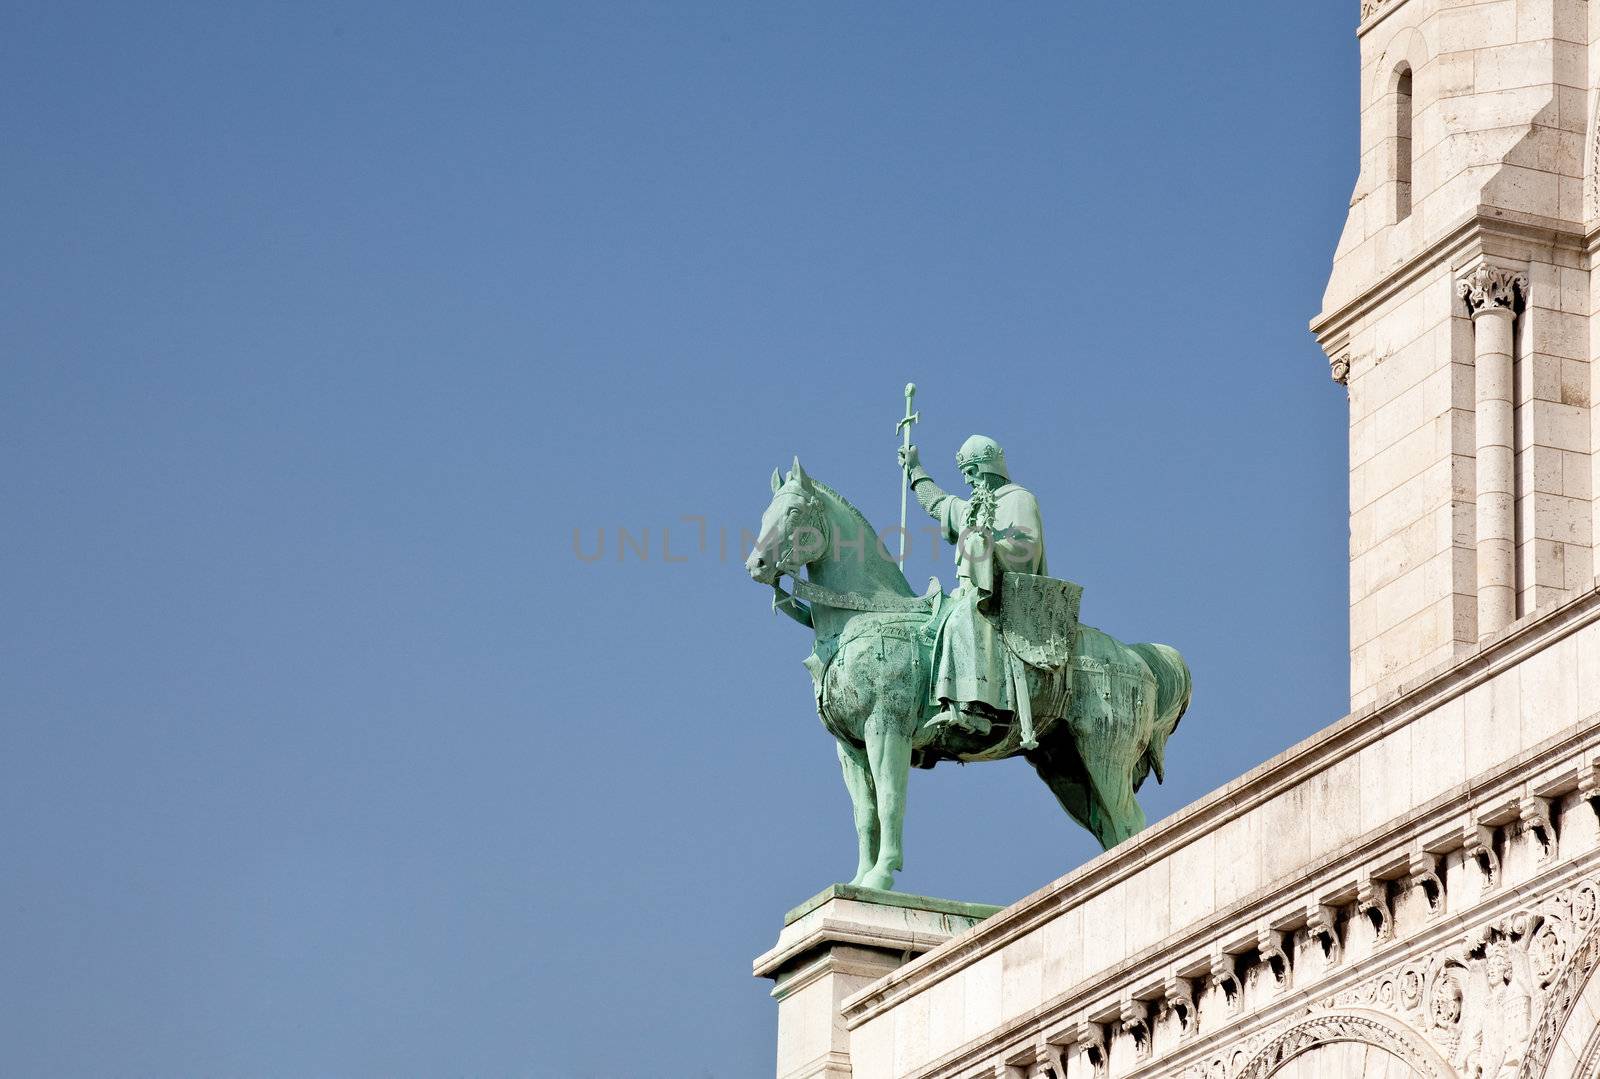 Bronze statue of horseman guards Sacre Coeur by steheap